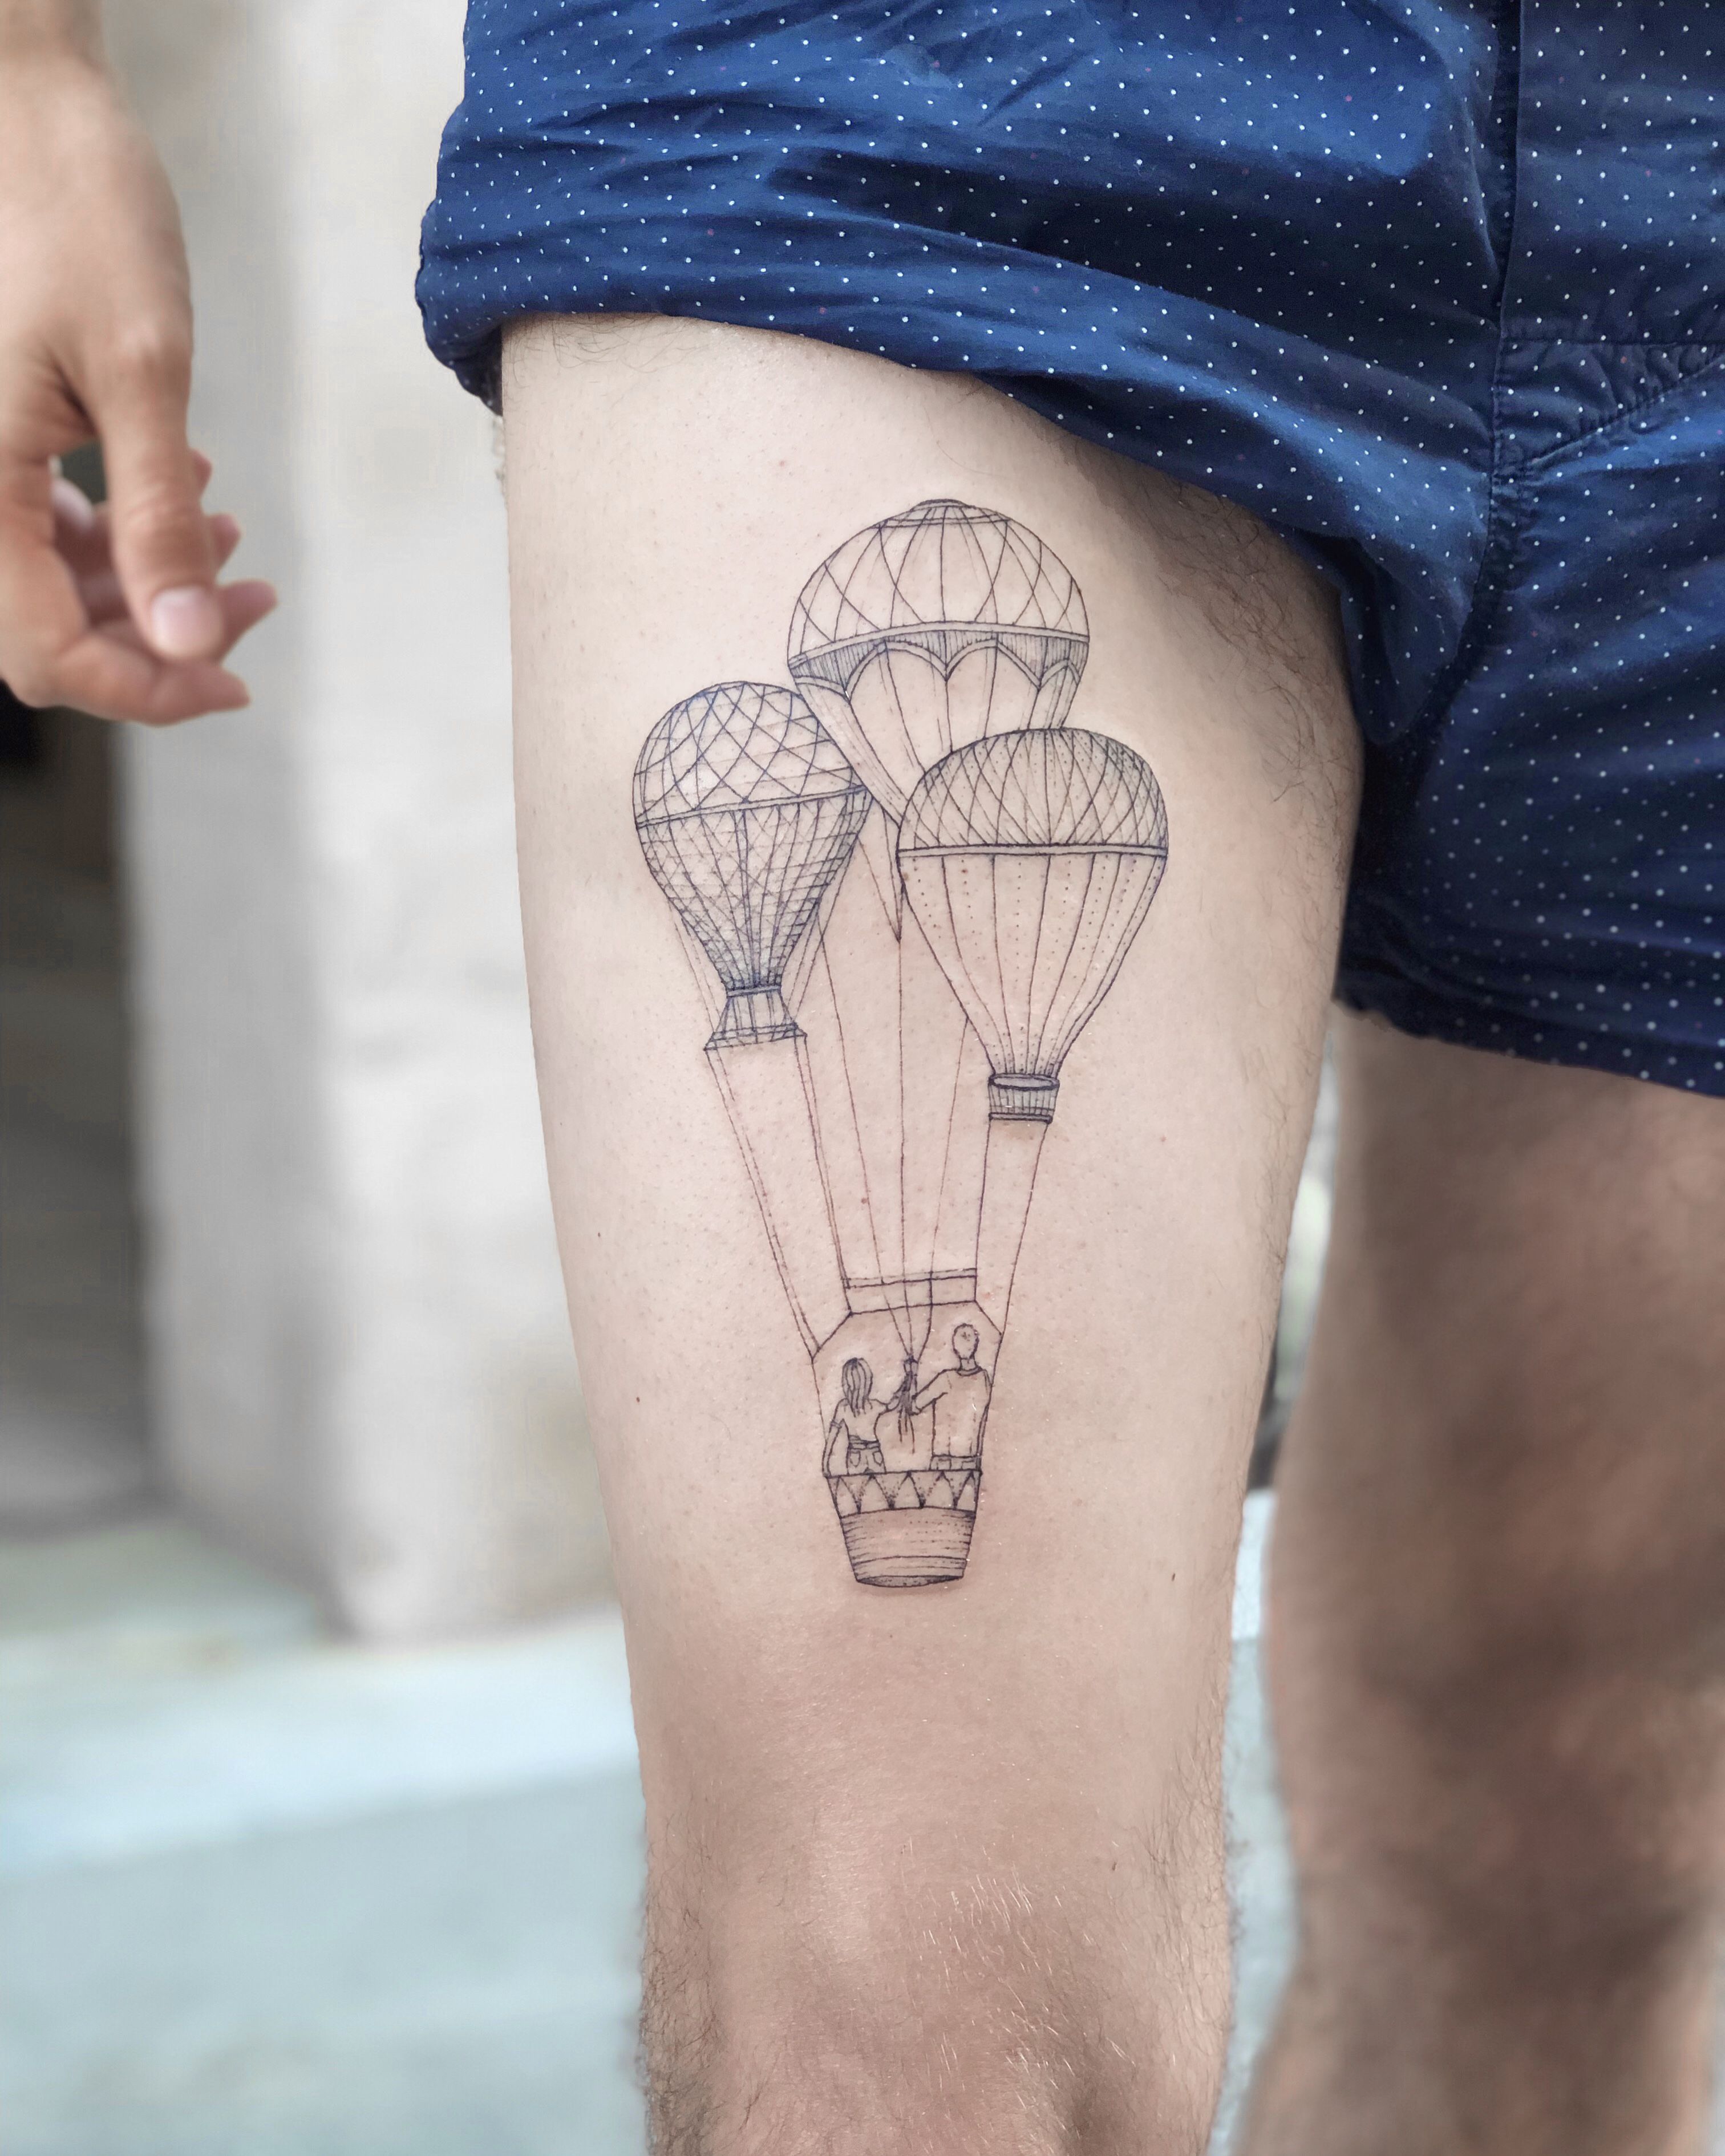 10 Balloon Tattoo Designs Inspired by Childhood Memories